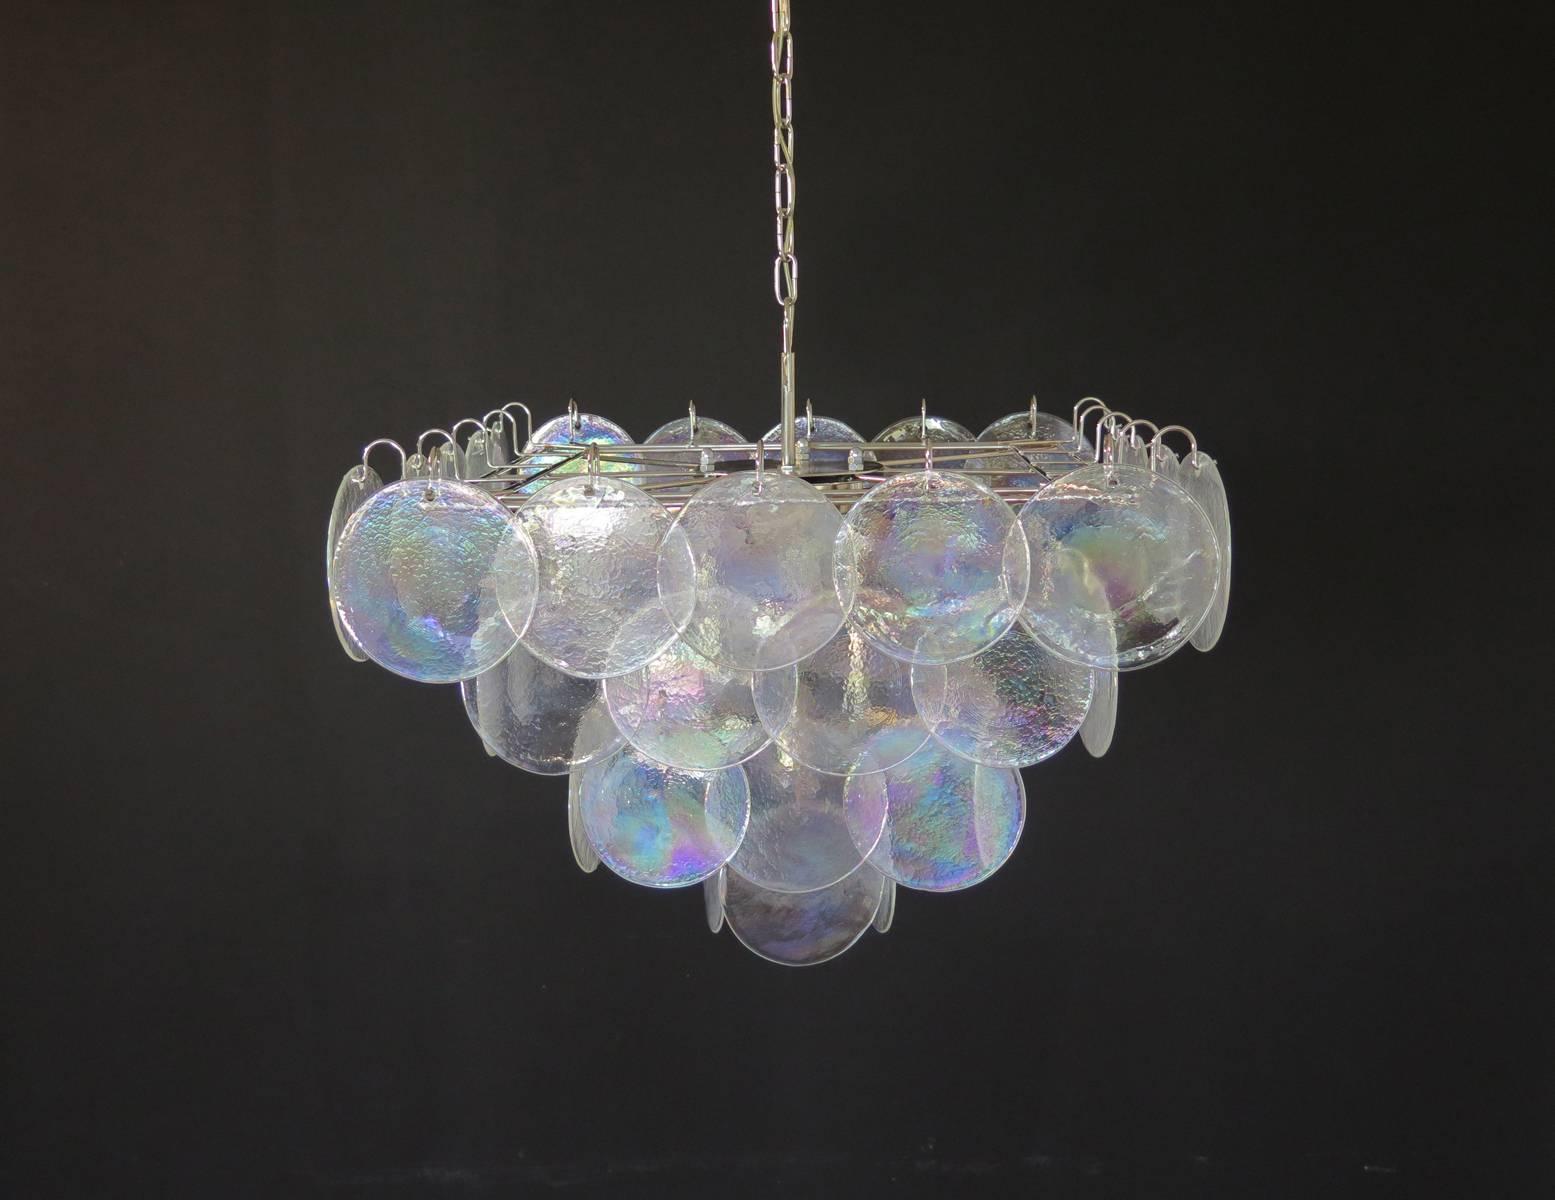 High Quality Murano Chandelier Space Age, Iridescent Glasses 6